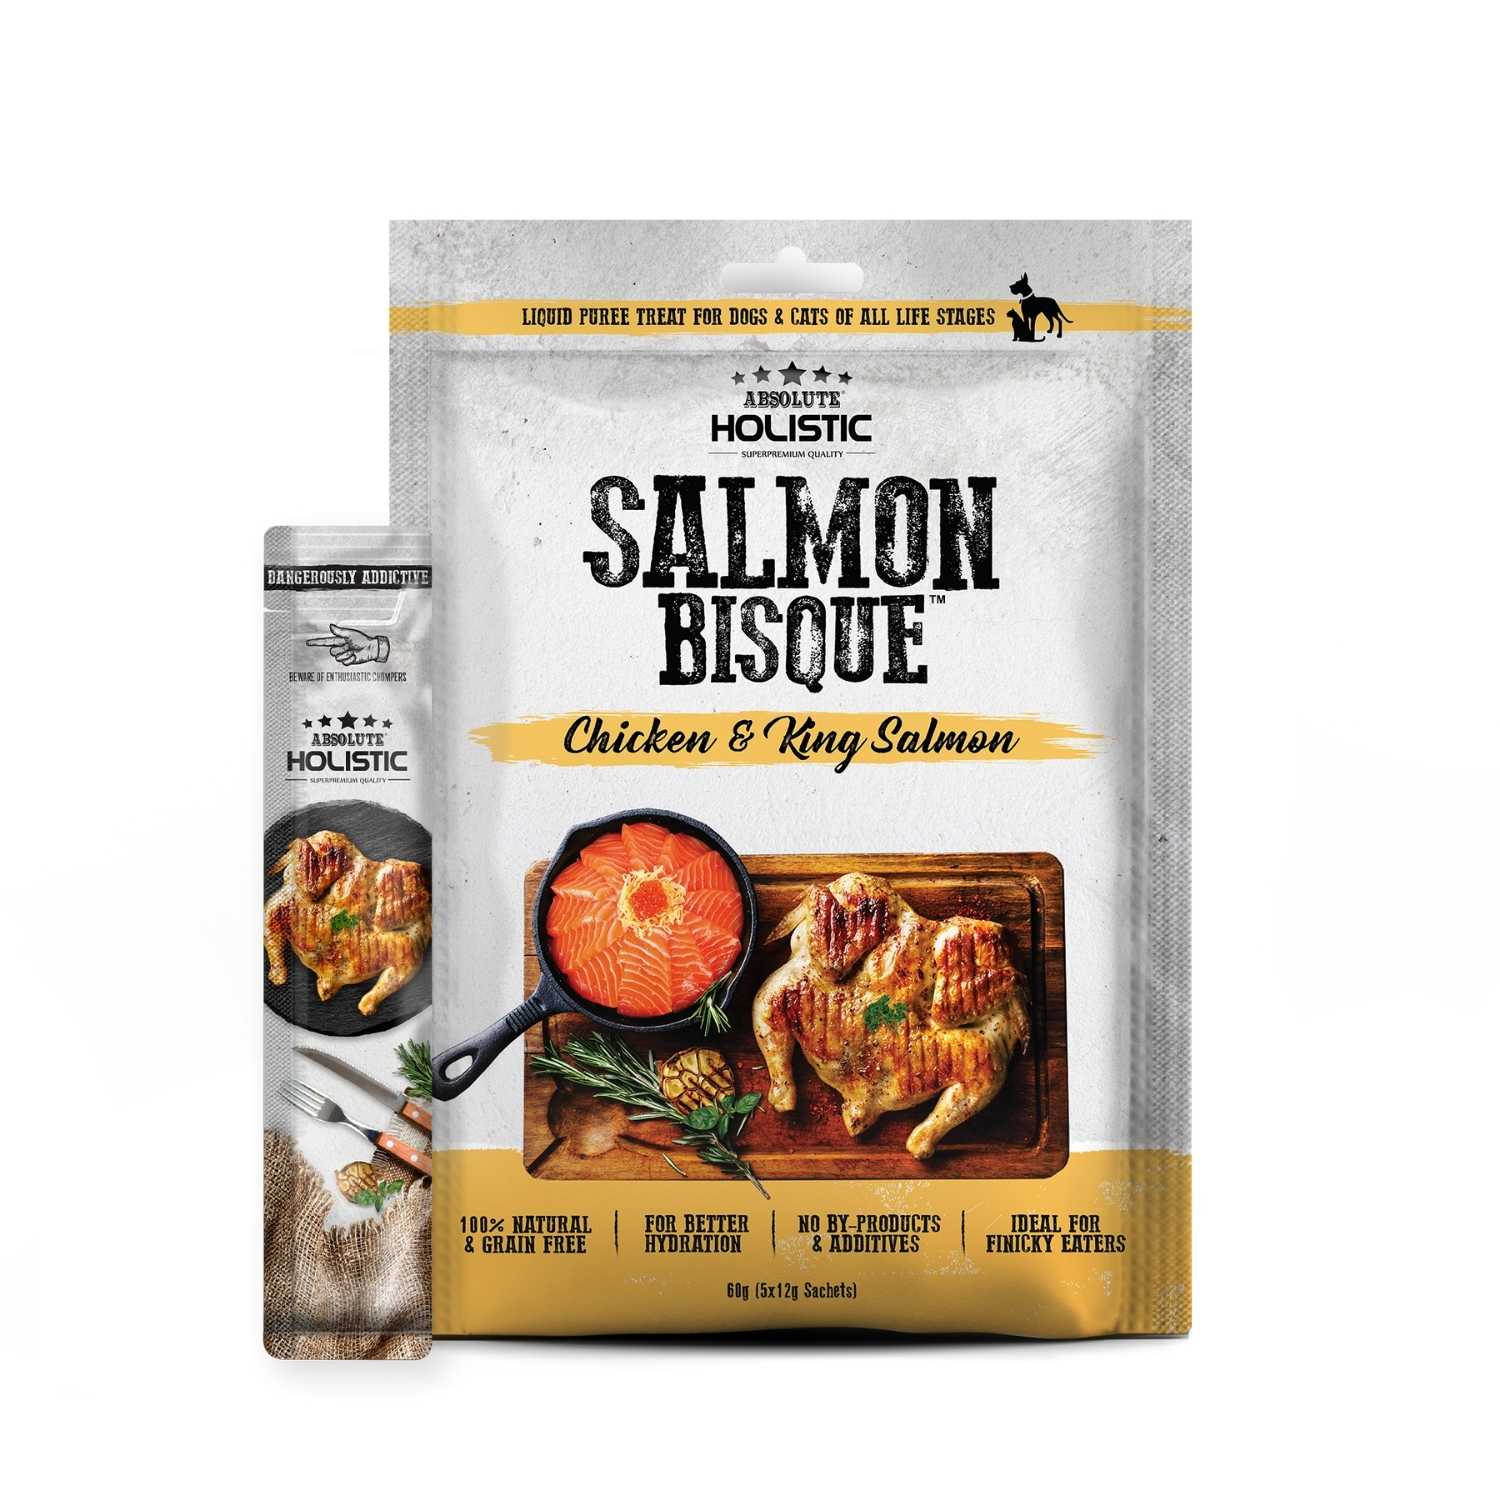 Absolute Holistic - Salmon Bisque (chicken & salmon) - Dog & Cat 5x12g Treats